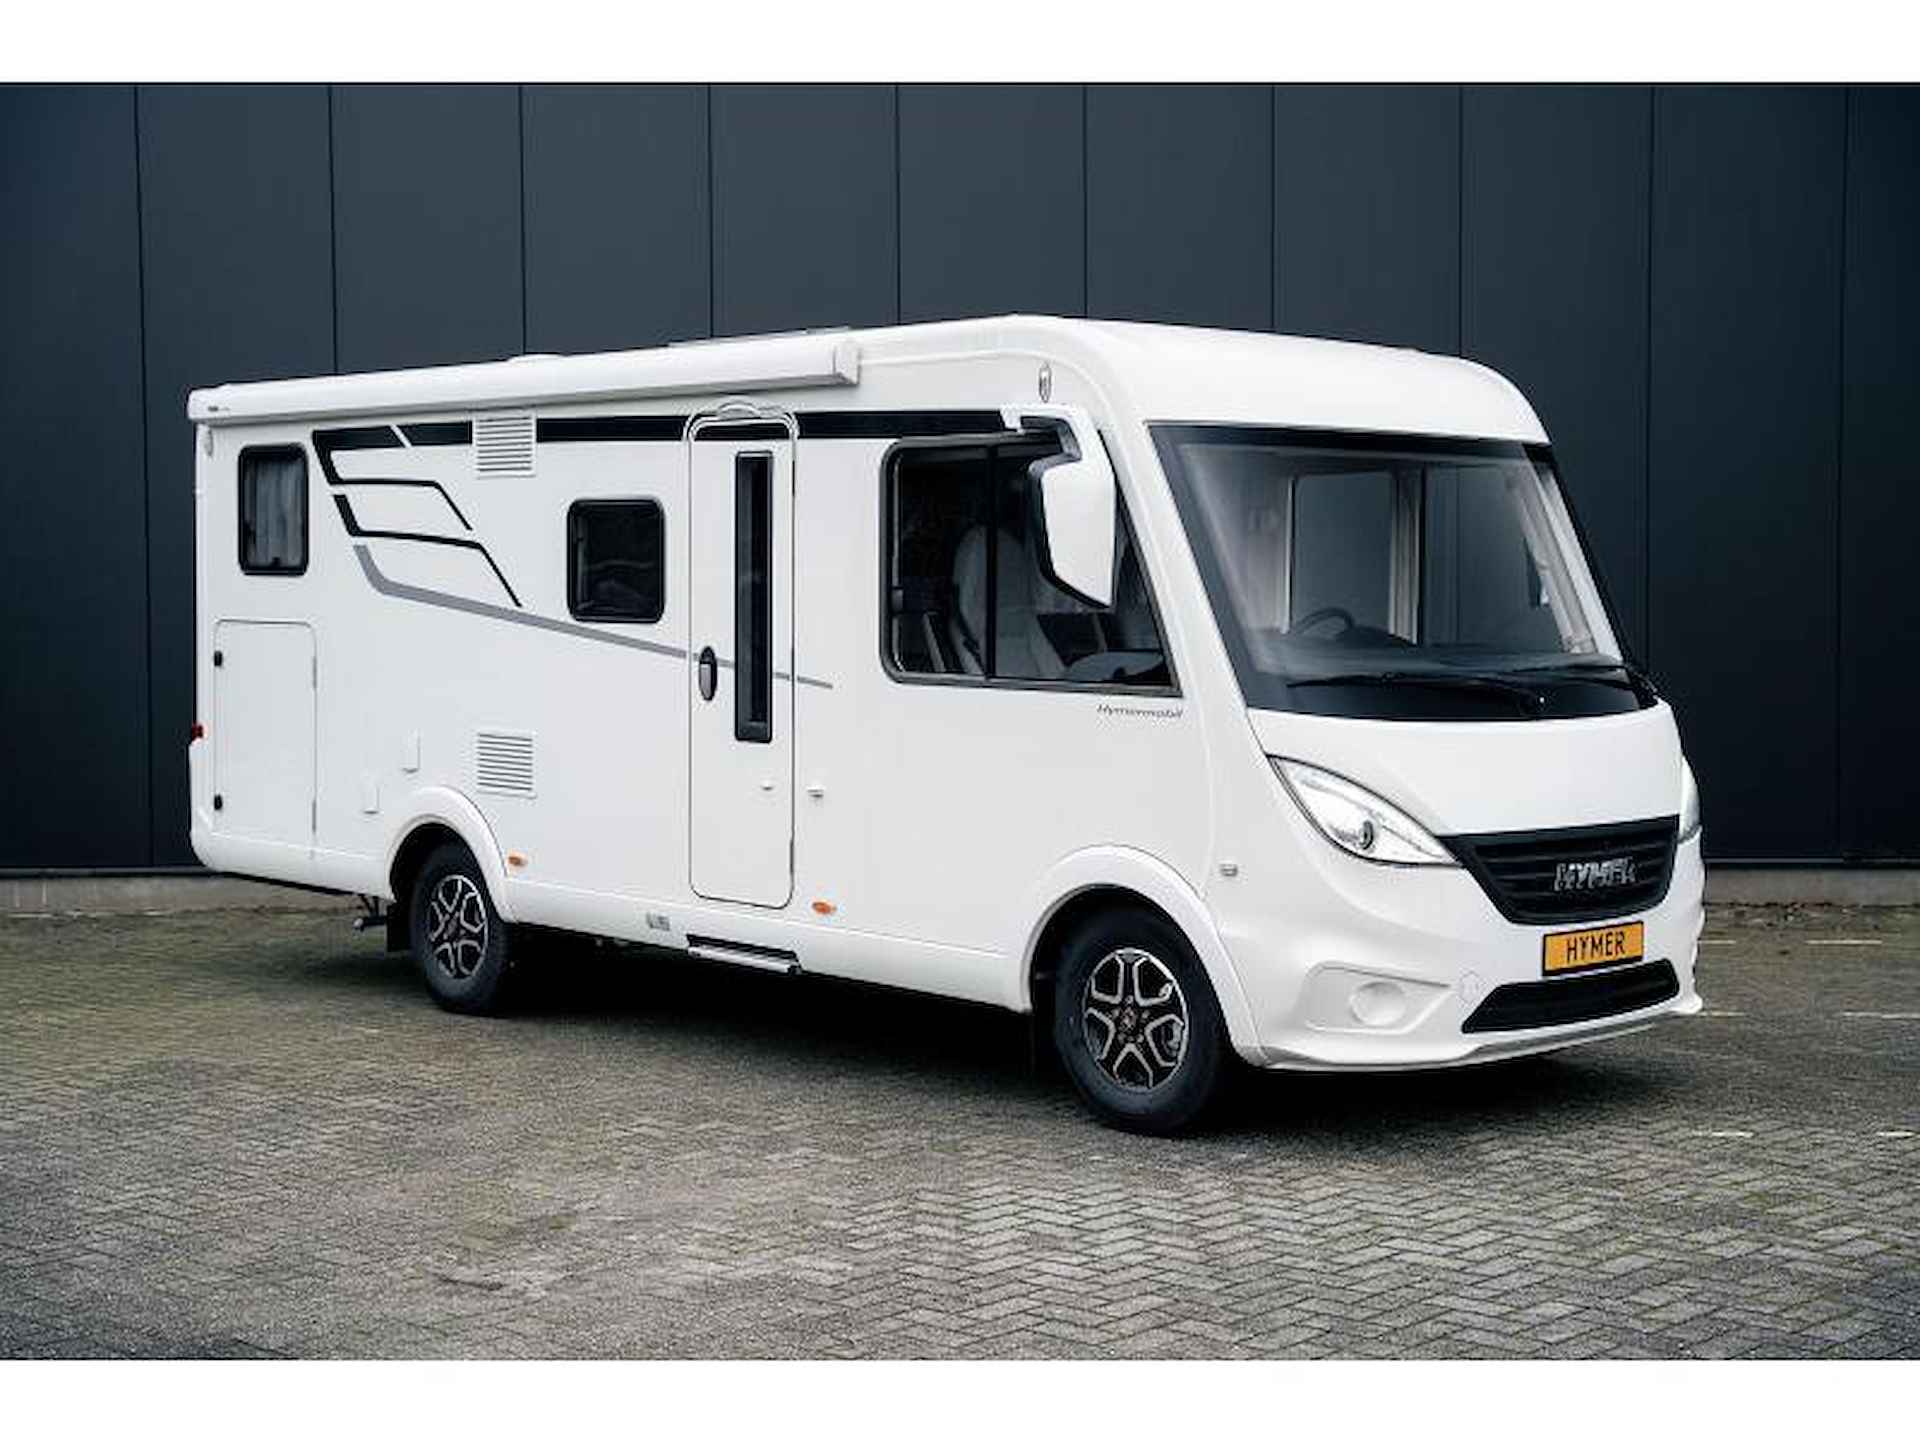 Hymer Exis-i 580 Pure uitvoering - 1/25